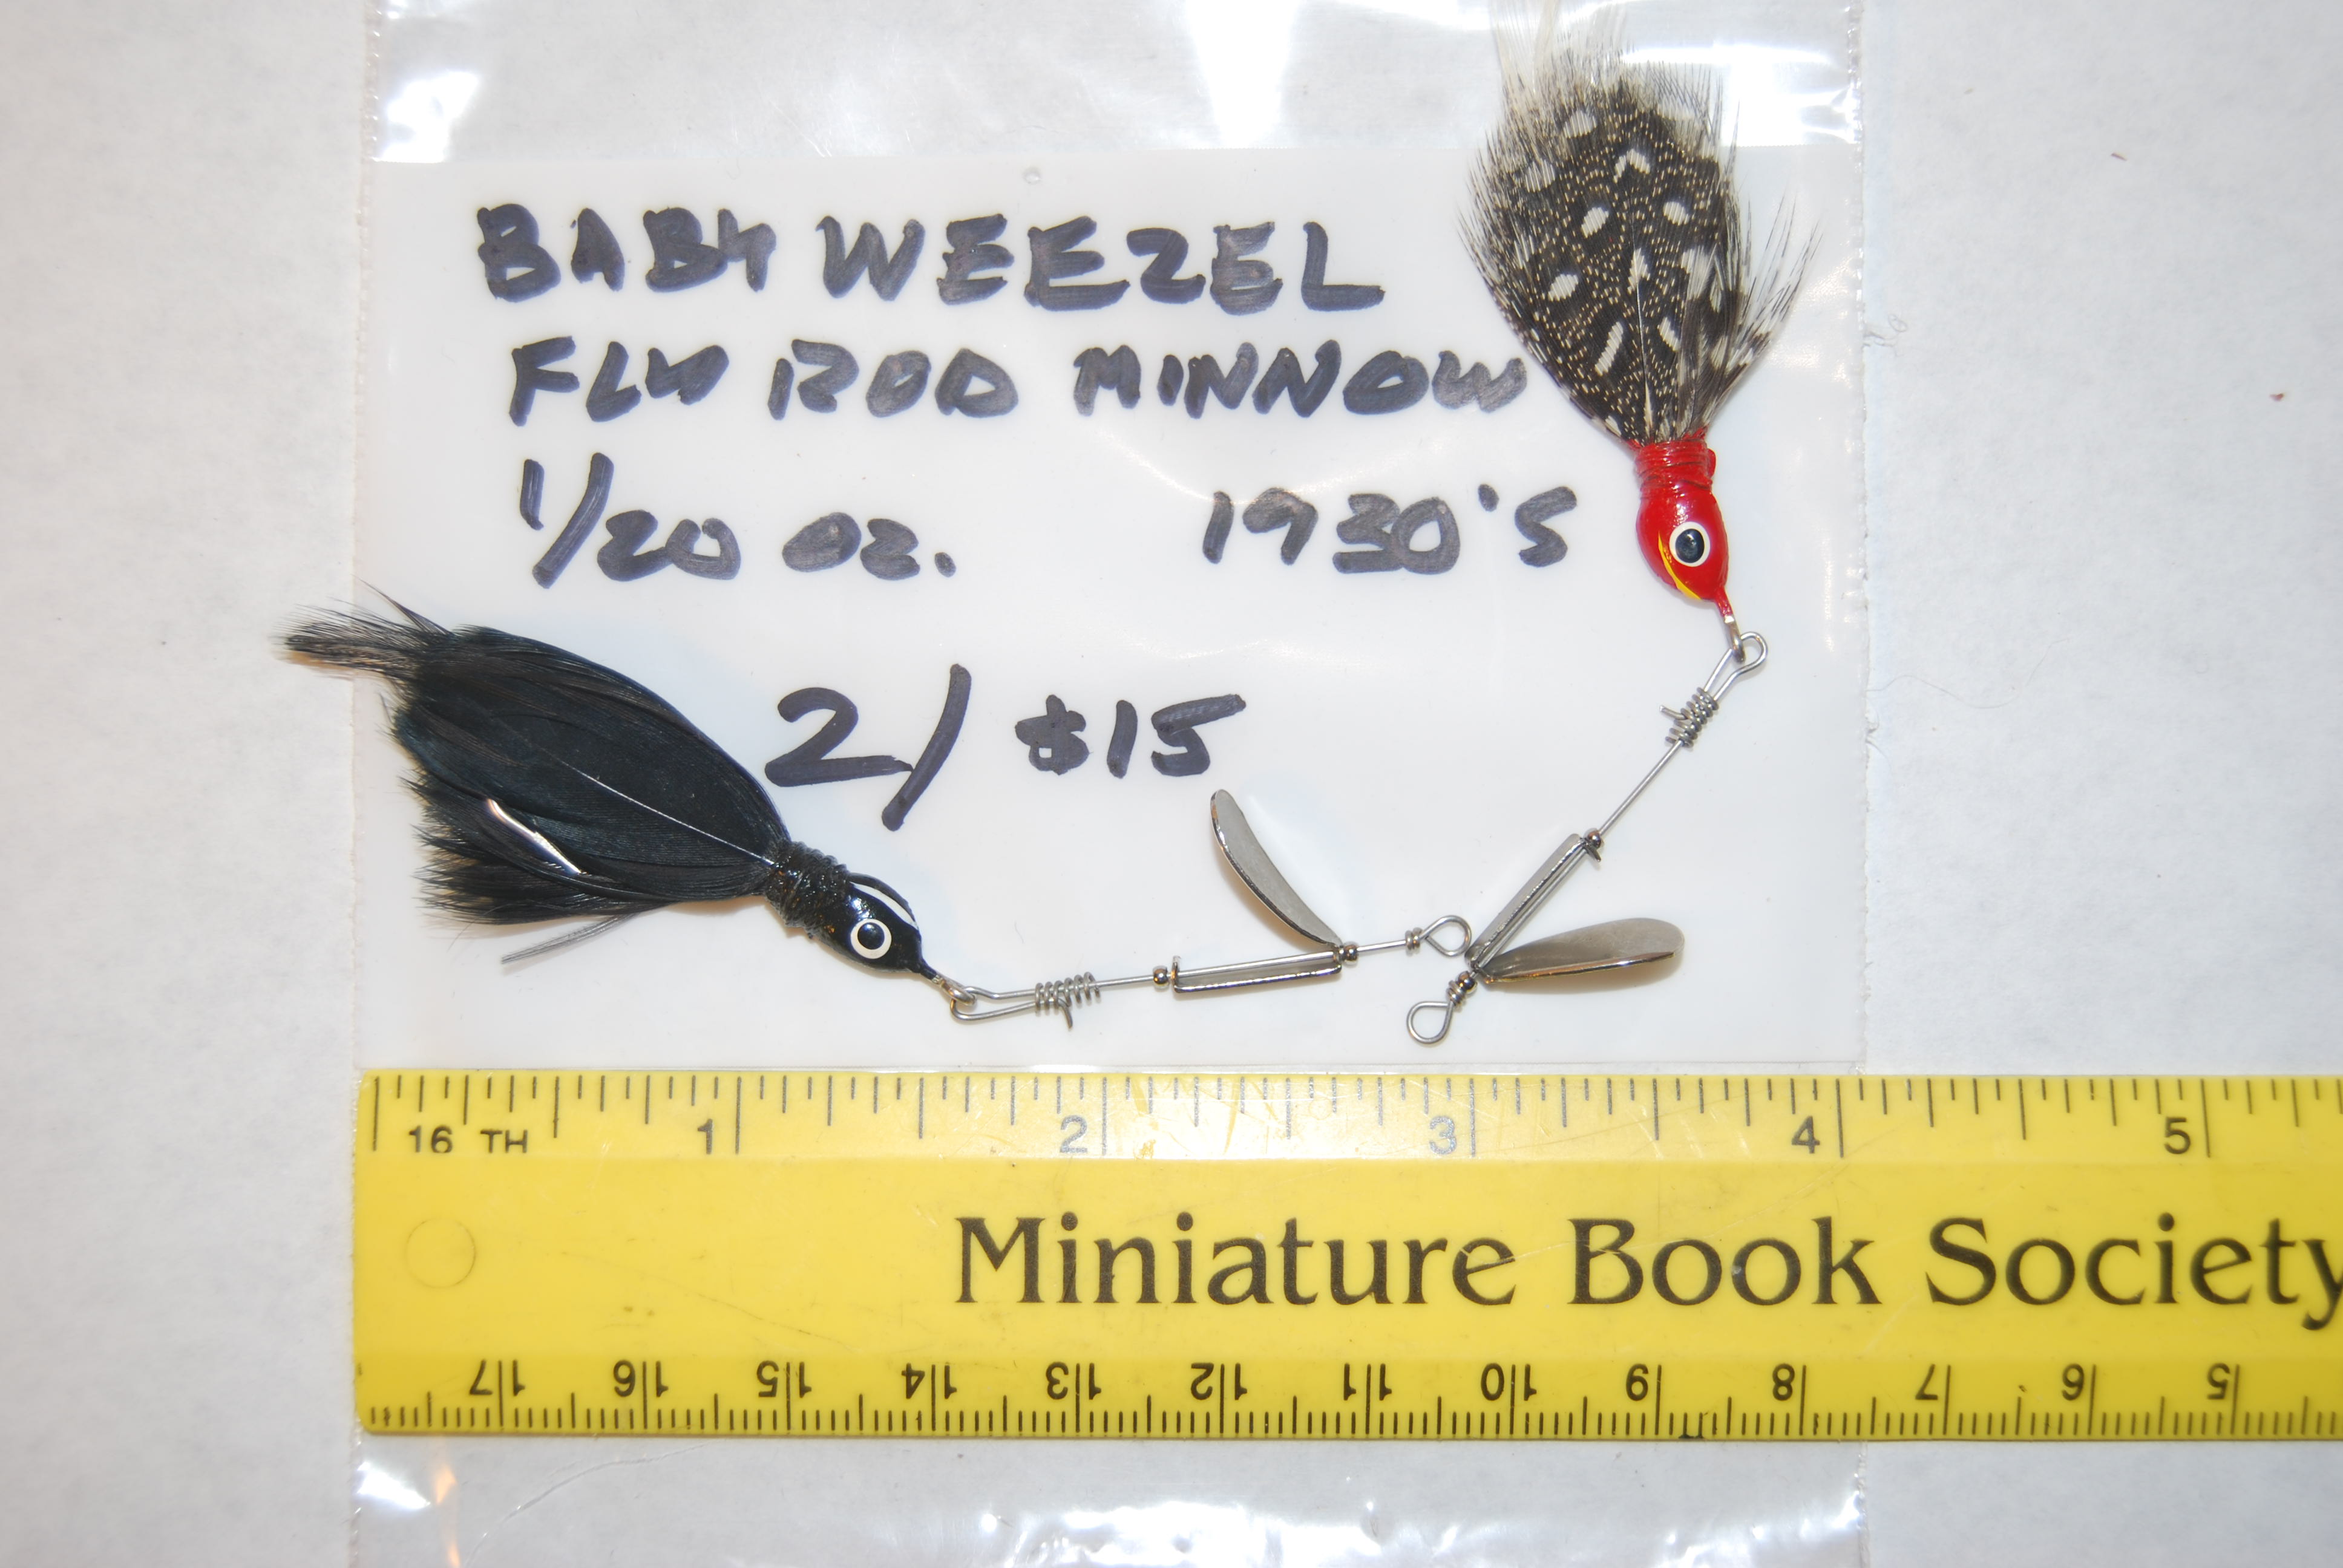 WEEZEL “BABY WEEZEL FEATHERED MINNOW’ Fly Rod Lure 1/20 oz. Circa 1930’s. 2  lures.